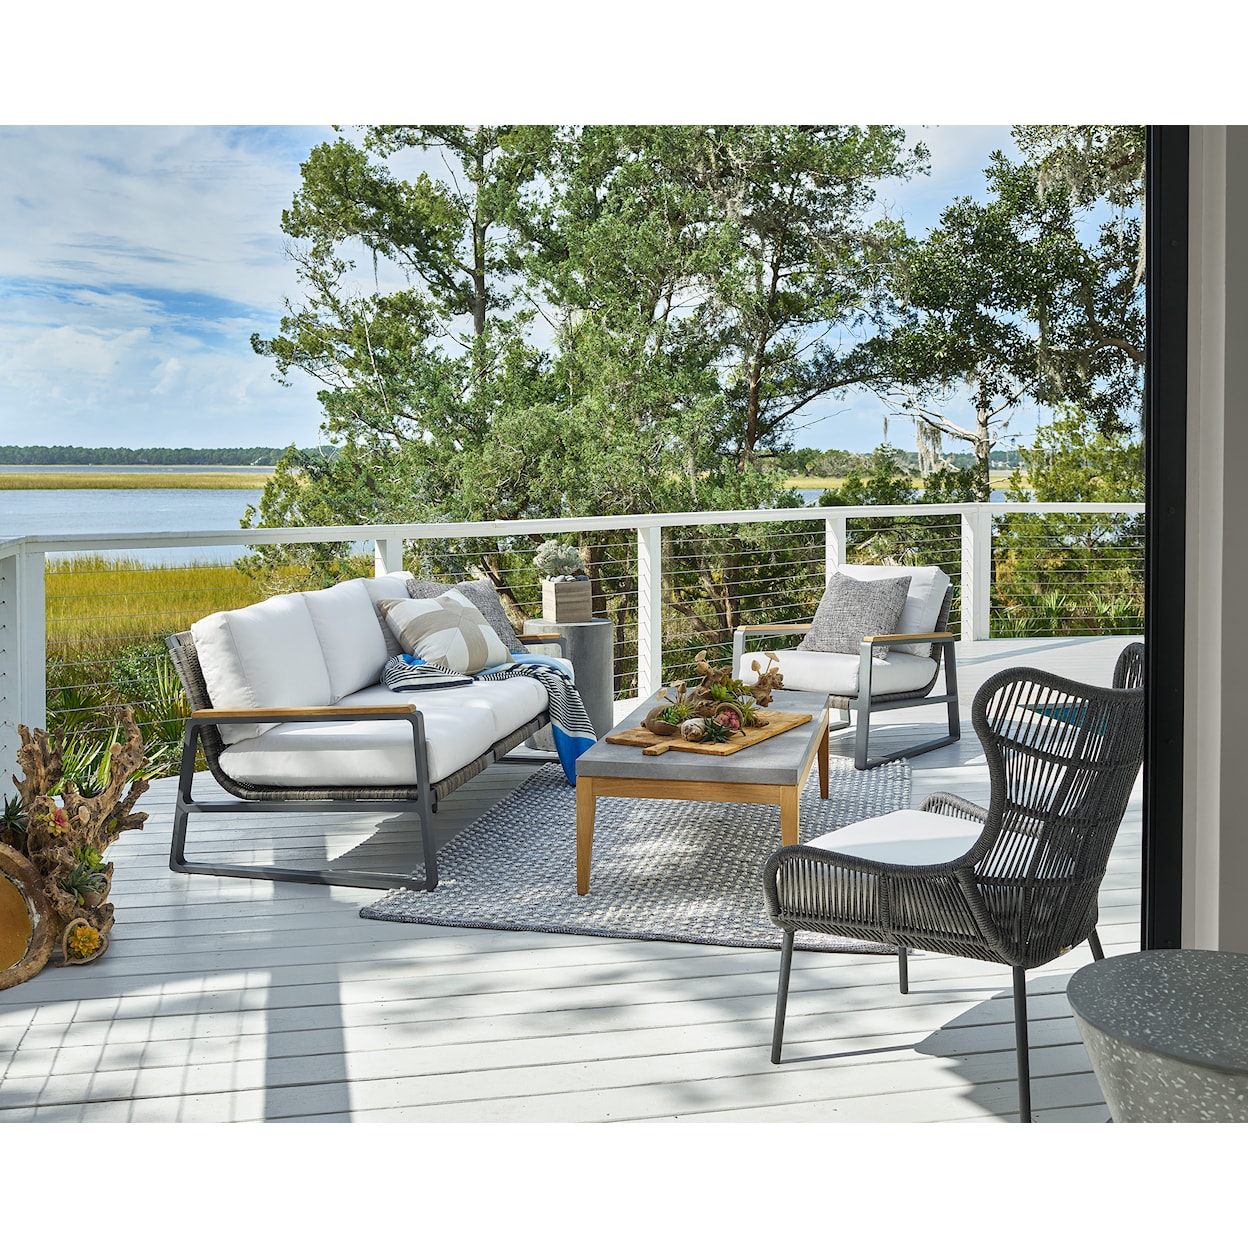 Universal Coastal Living Outdoor Outdoor Lounge Chair